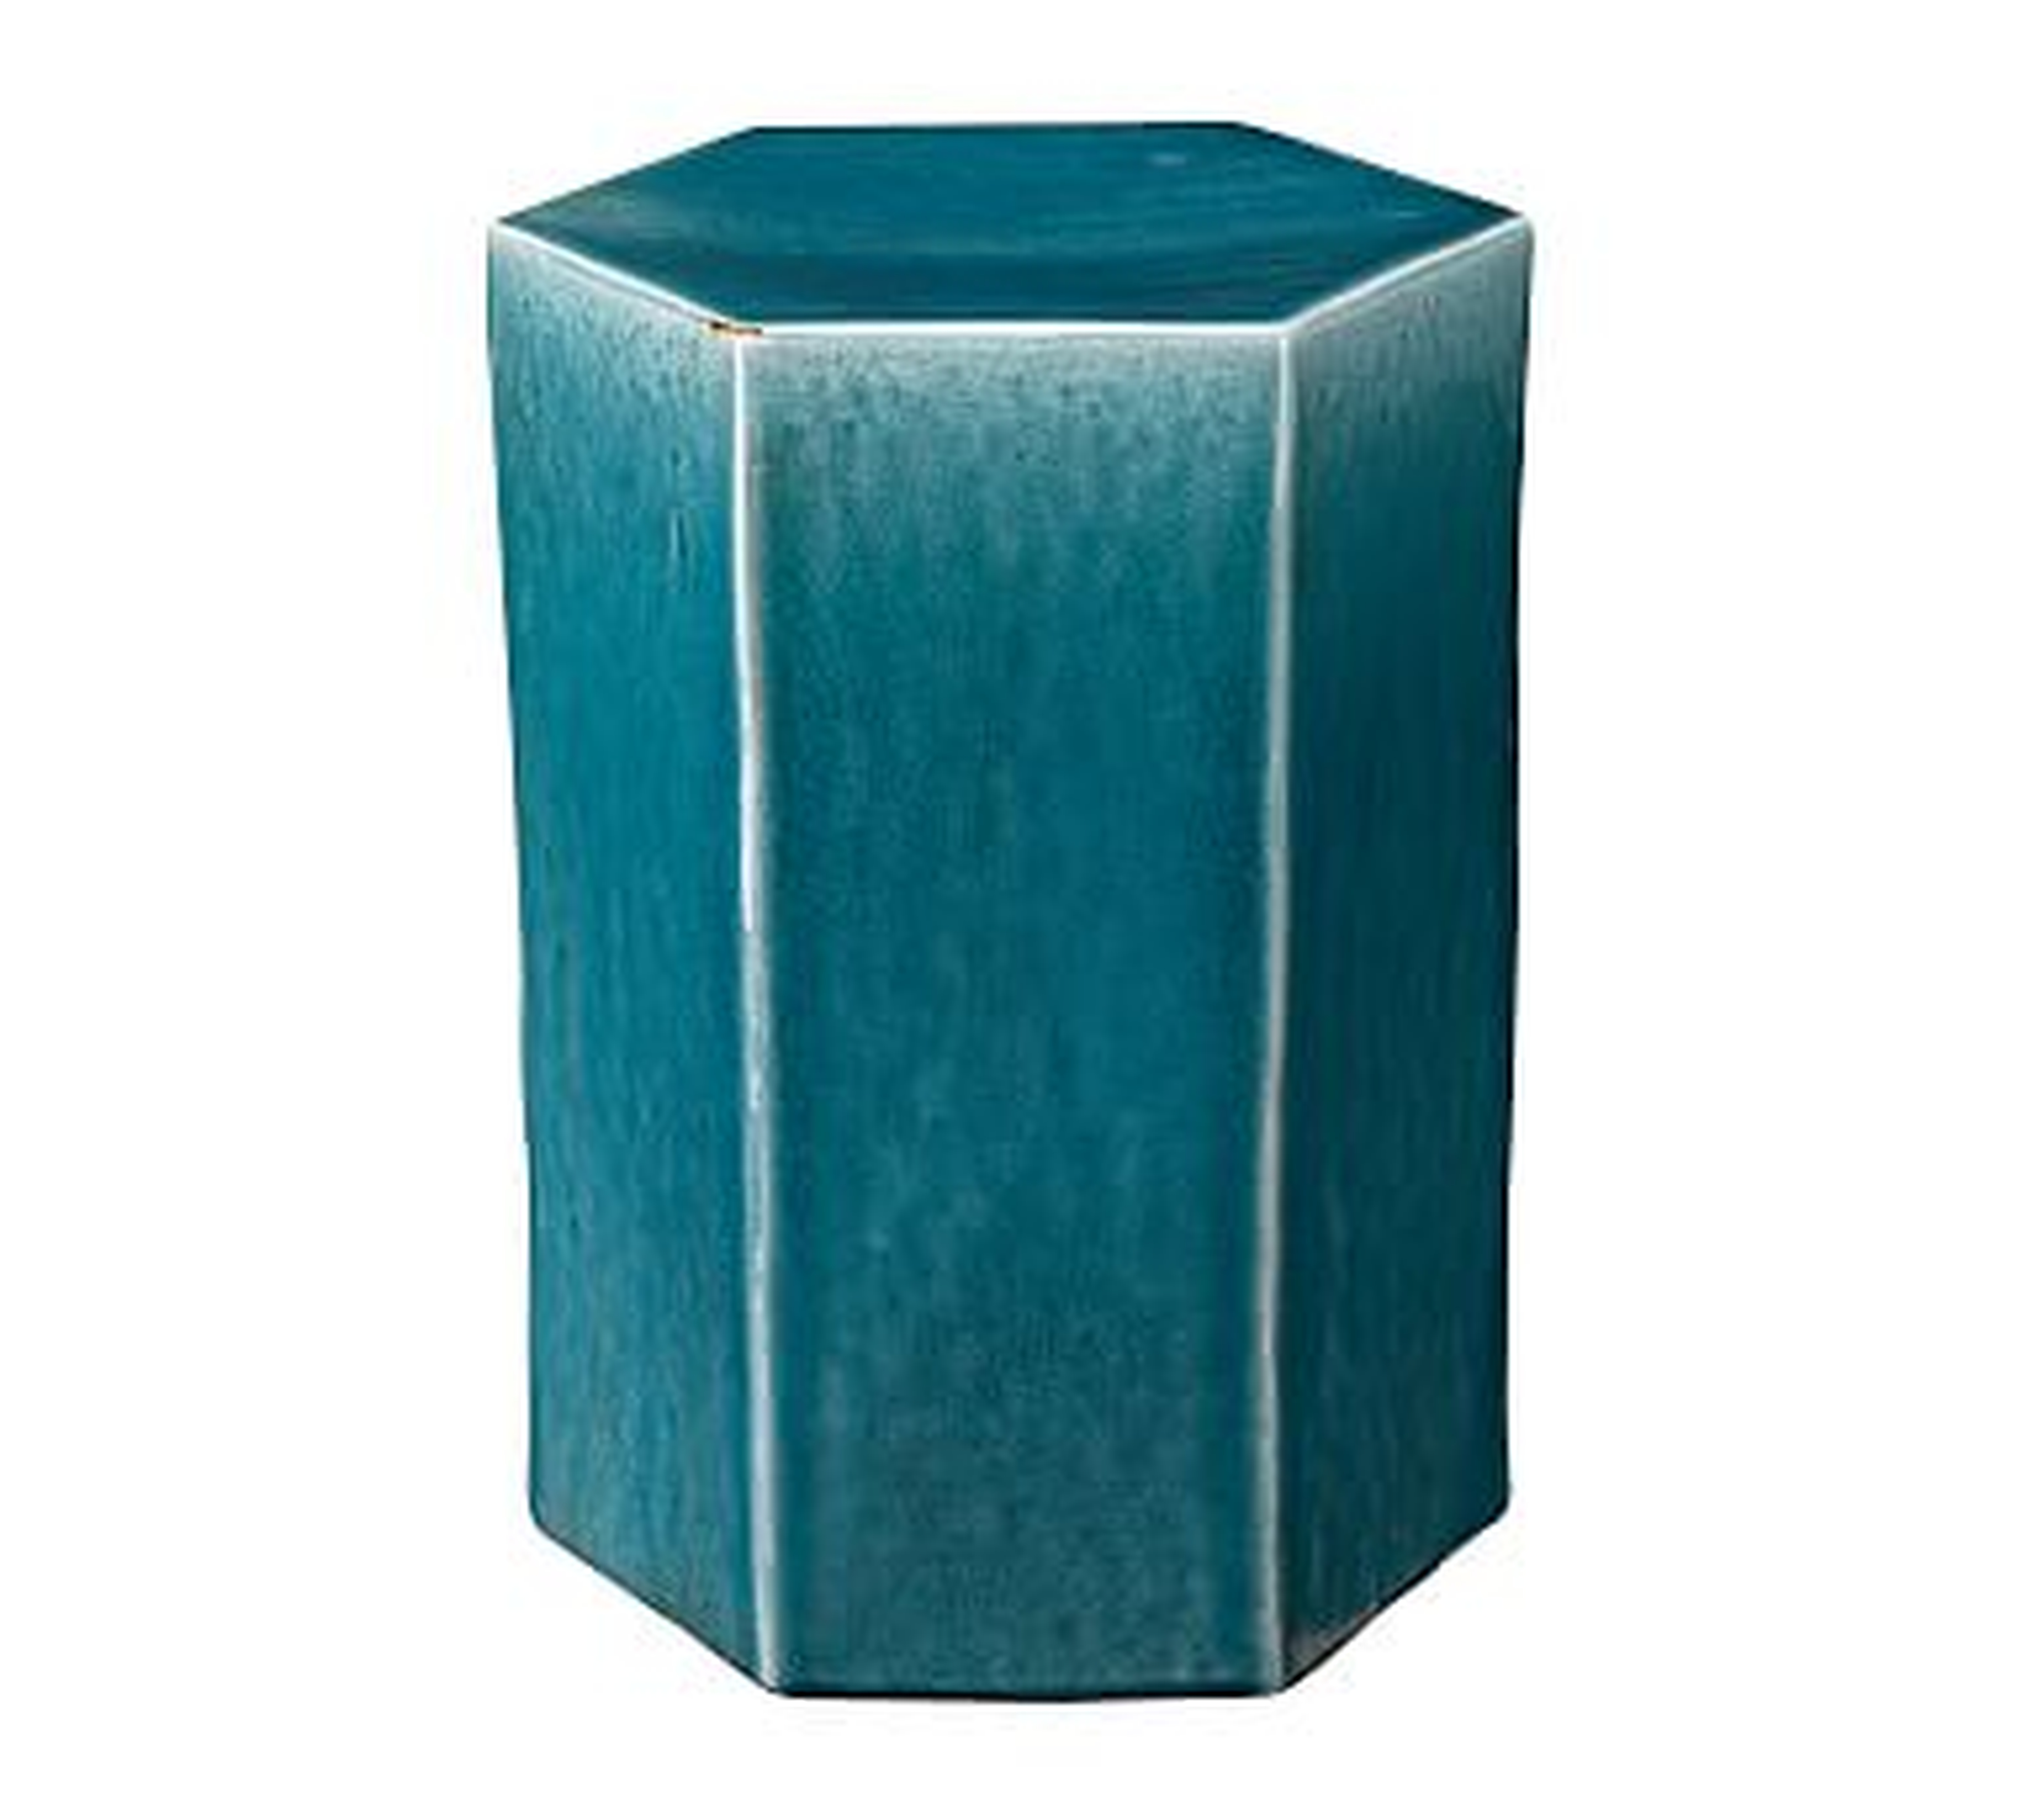 Croft Ceramic Side Table, Teal, Small - Pottery Barn